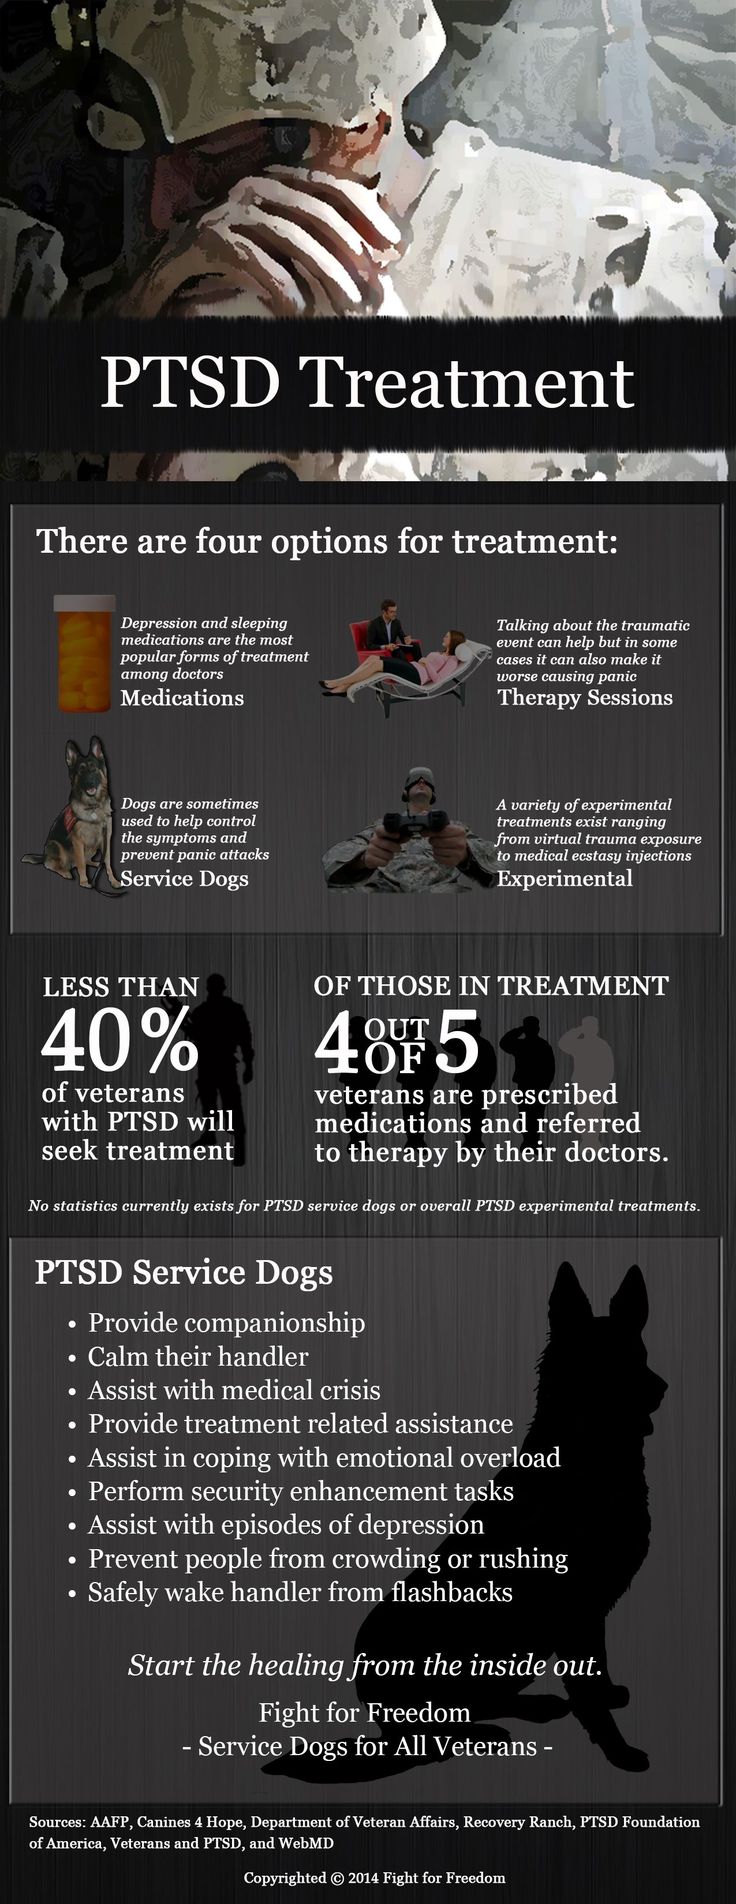 1546159515_925_Psychology-Infographic-Infographic-on-PTSD-and-its-affects-2-of-2-fightforfreedom-ptsd-veterans Psychology Infographic : Infographic on PTSD and its affects (2 of 2) #fightforfreedom #ptsd #veterans